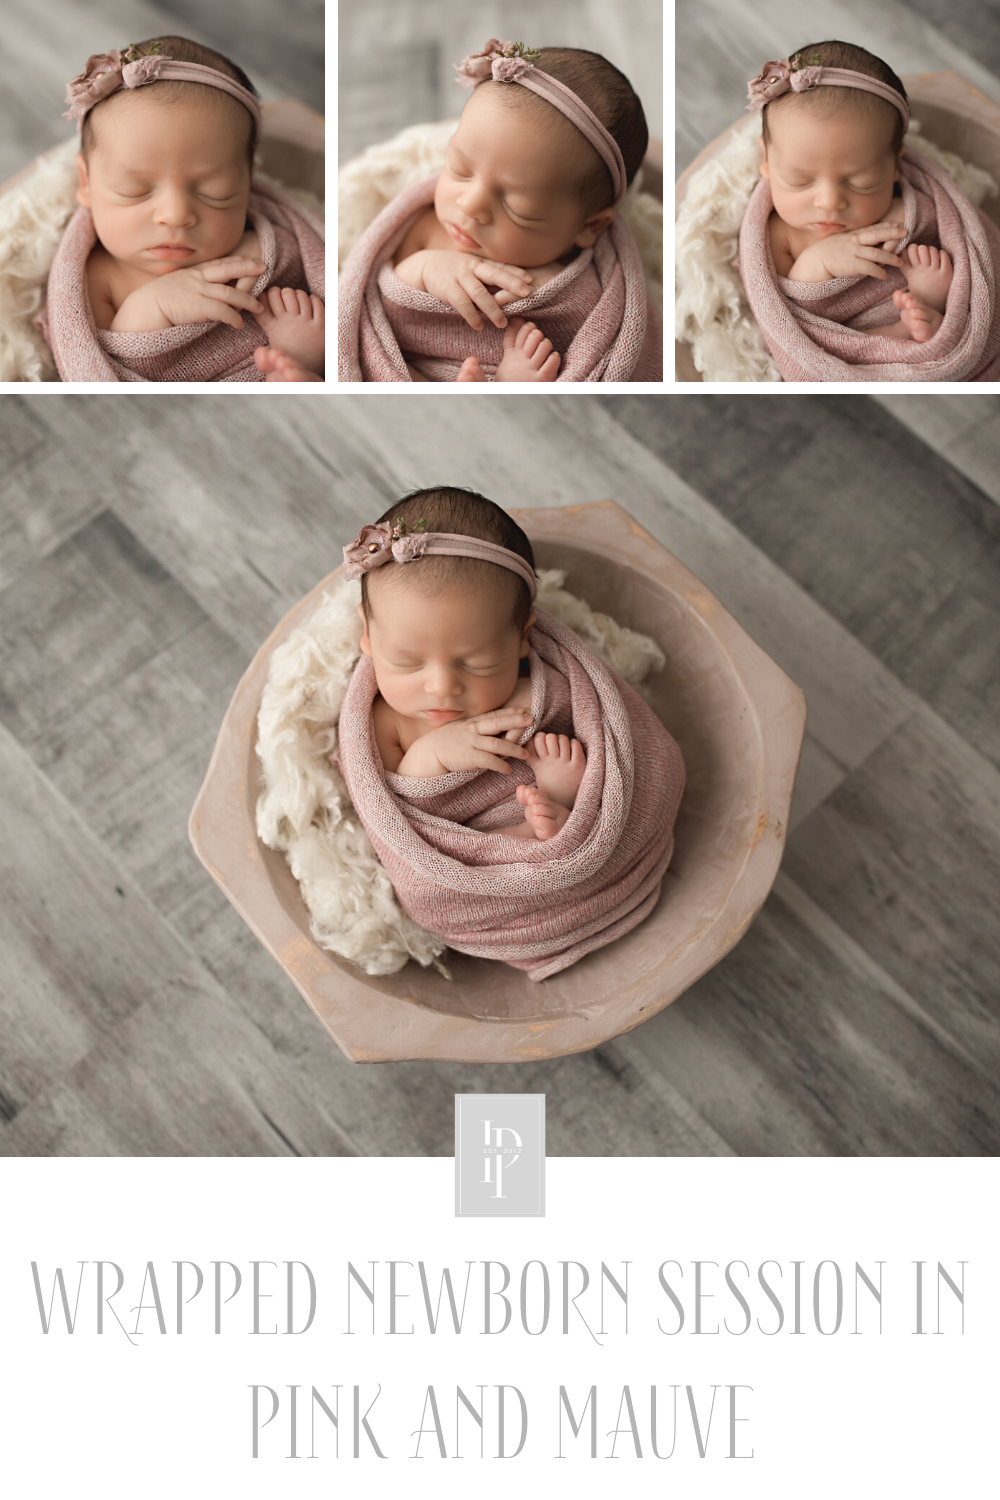 Ideas for wrapped poses for a newborn session